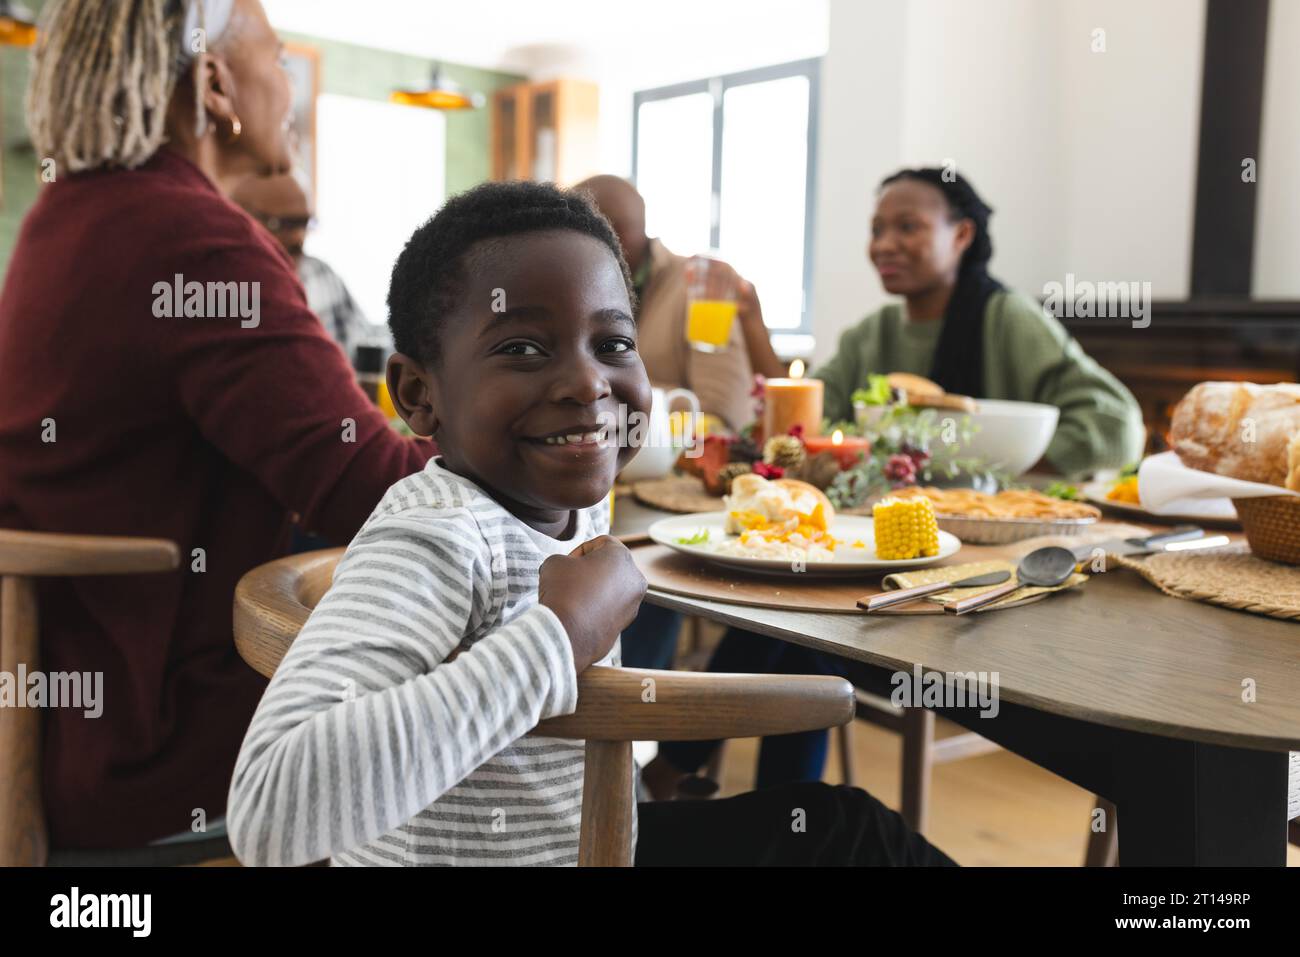 Portrait of african american son with family smiling at thanksgiving dinner table Stock Photo